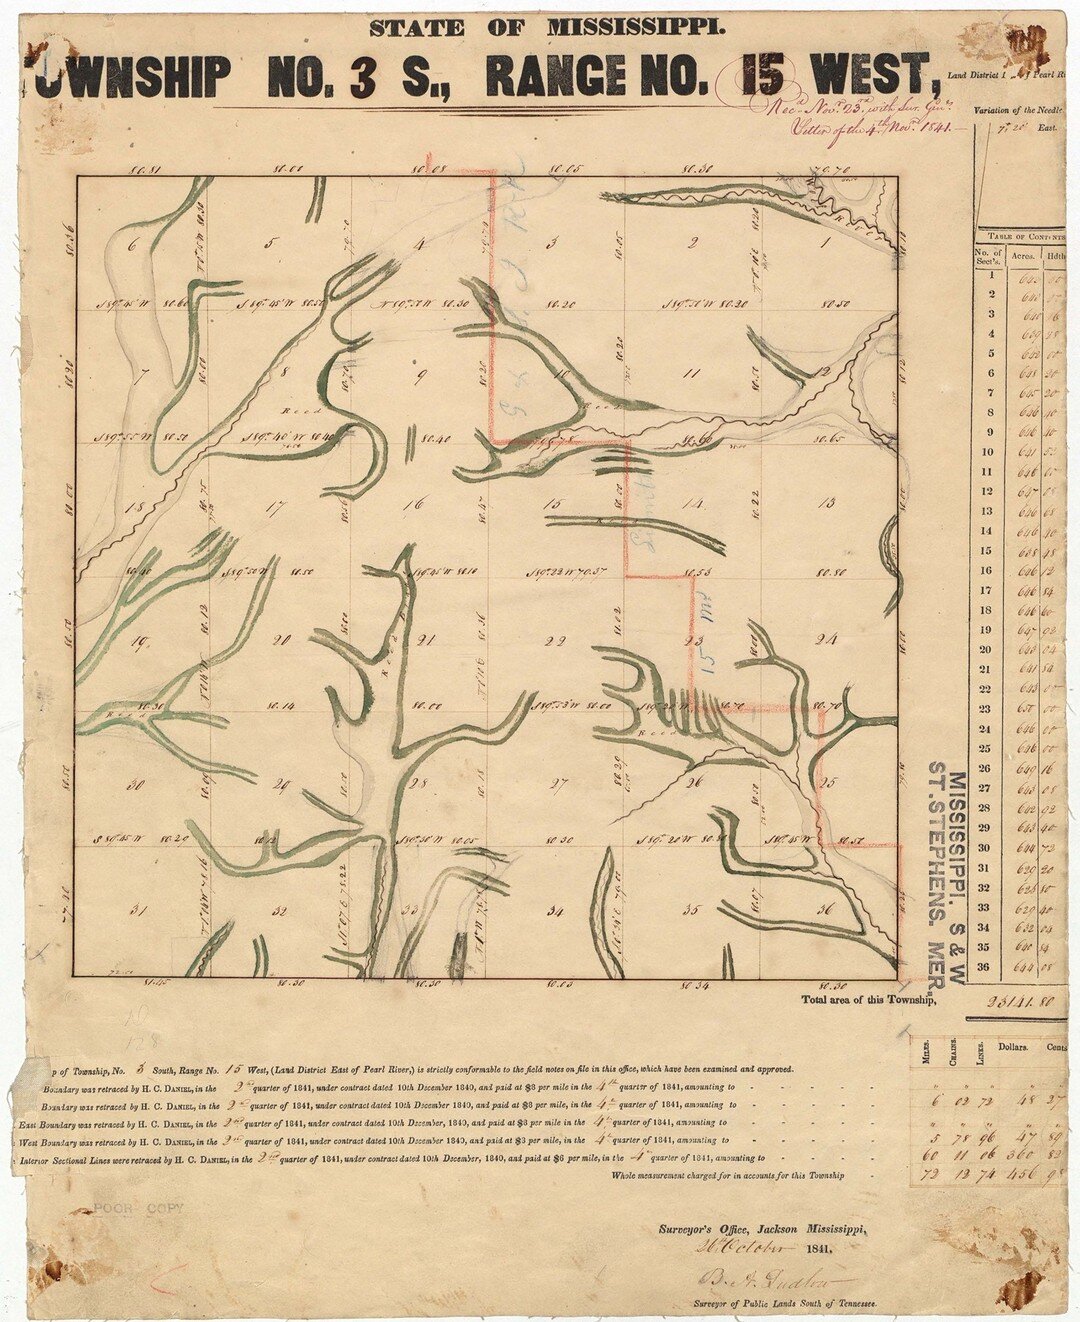 Did you know Mississippi was the second state in the Union to be surveyed?  Andrew Ellicott surveyed along the 31st parallel beginning in 1796 until he reached the head of Mobile Bay at the end of 1799. The plat shown here of Township 3 South in Pear